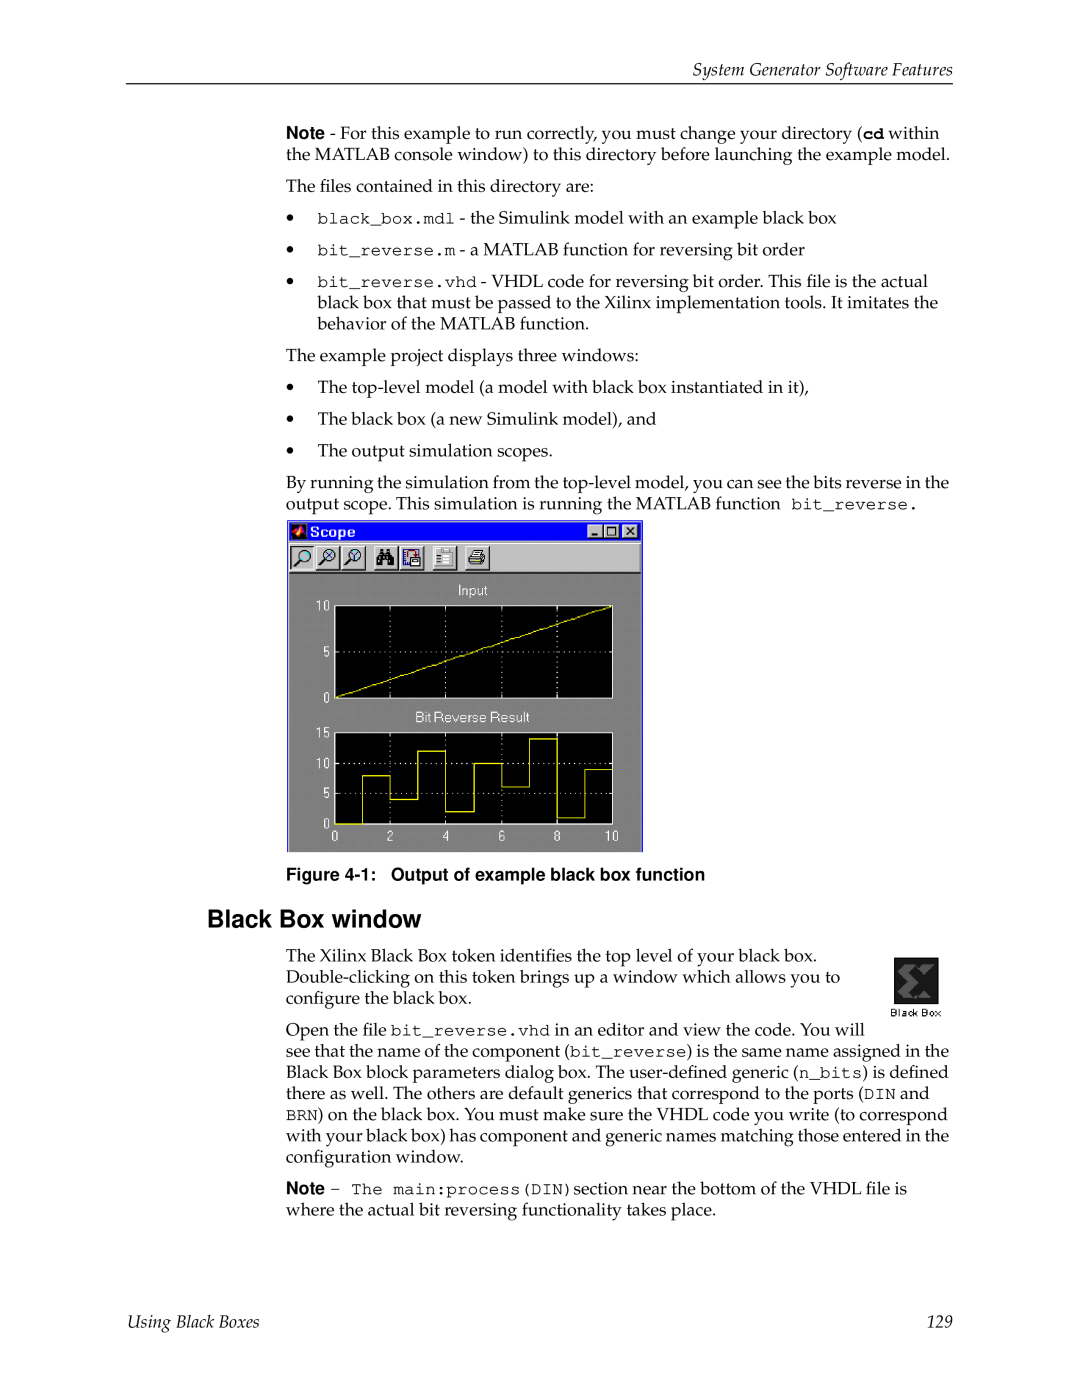 Xilinx V2.1 manual Black Box window, Using Black Boxes, System Generator Software Features 